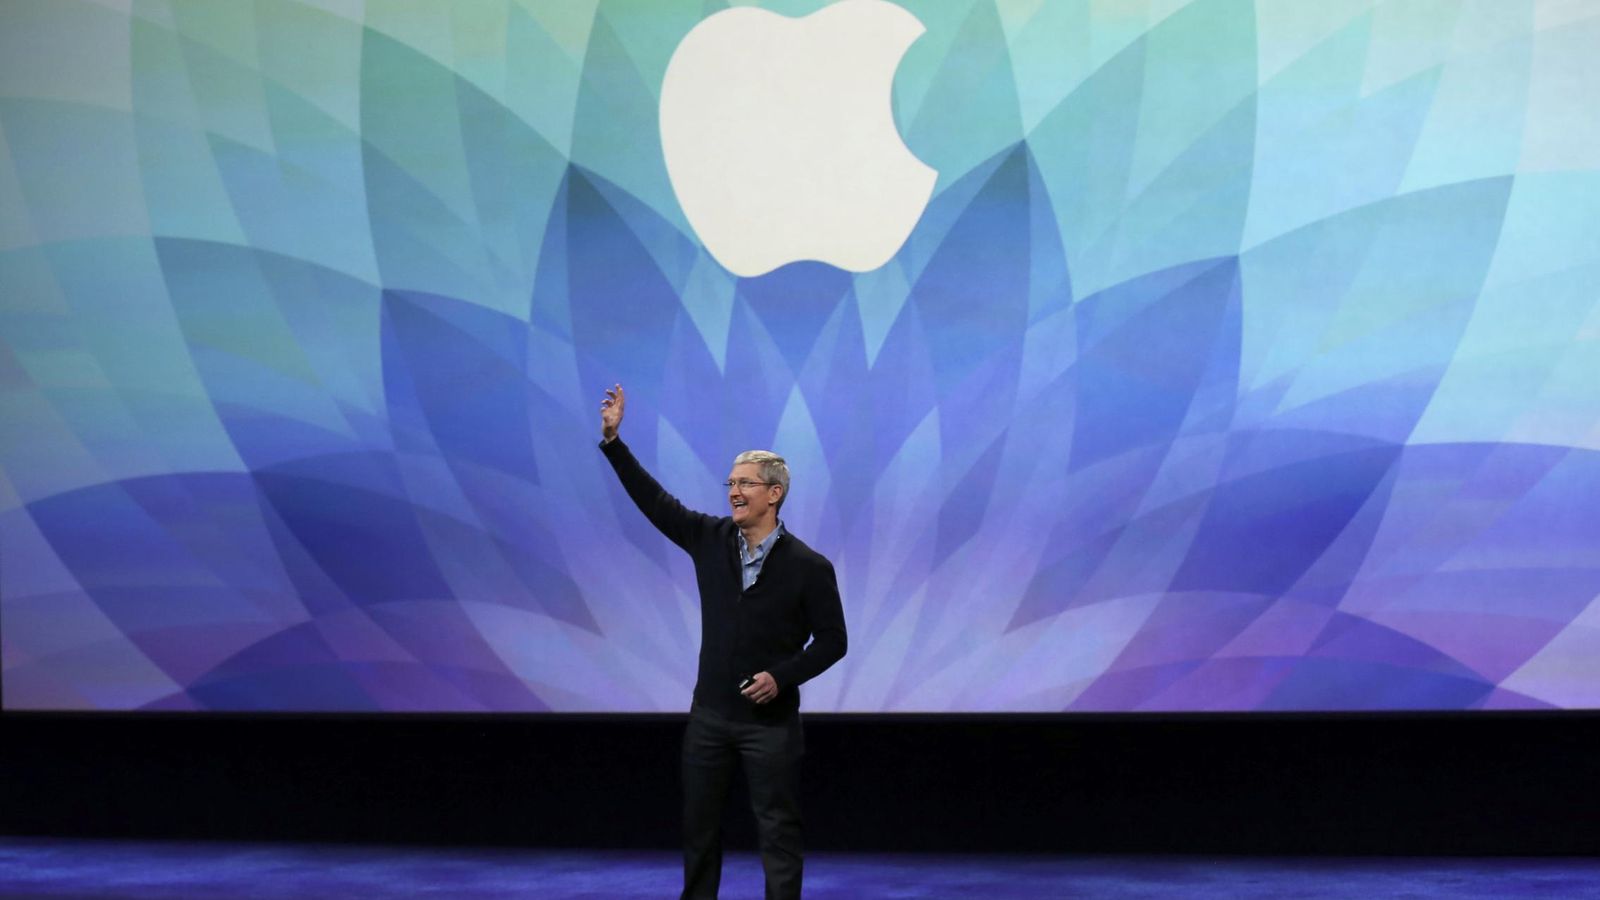 Foto: Apple CEO Tim Cook speaks during an Apple event in San Francisco